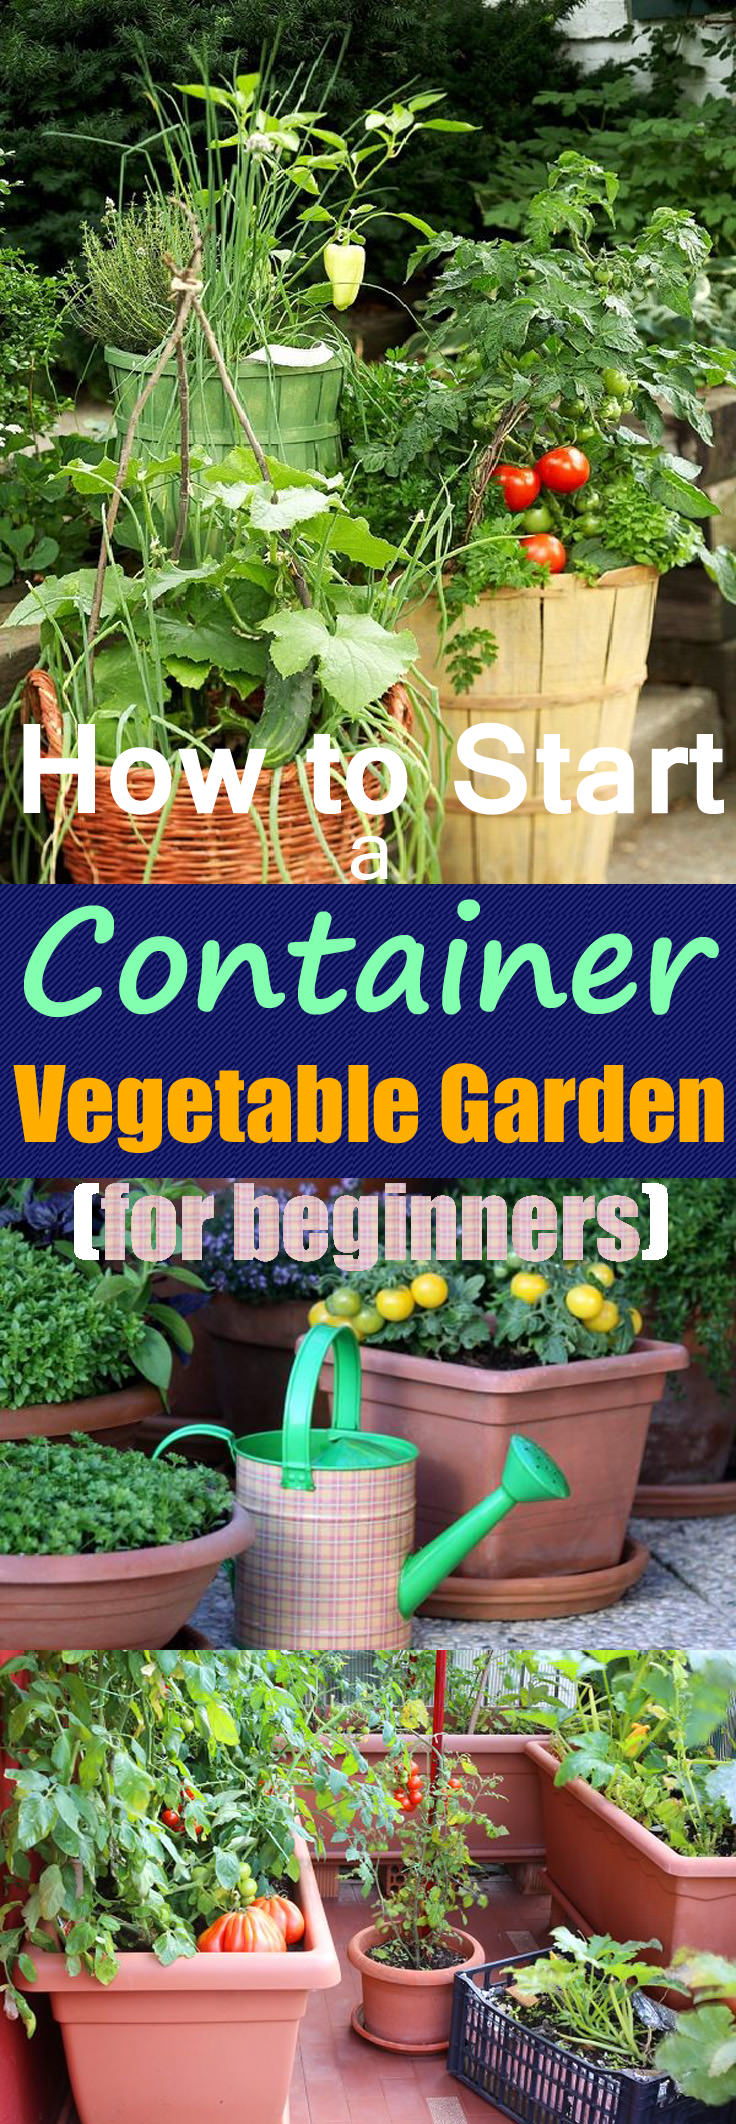 Growing Vegetables In Pots | Starting A Container Vegetable Garden ...